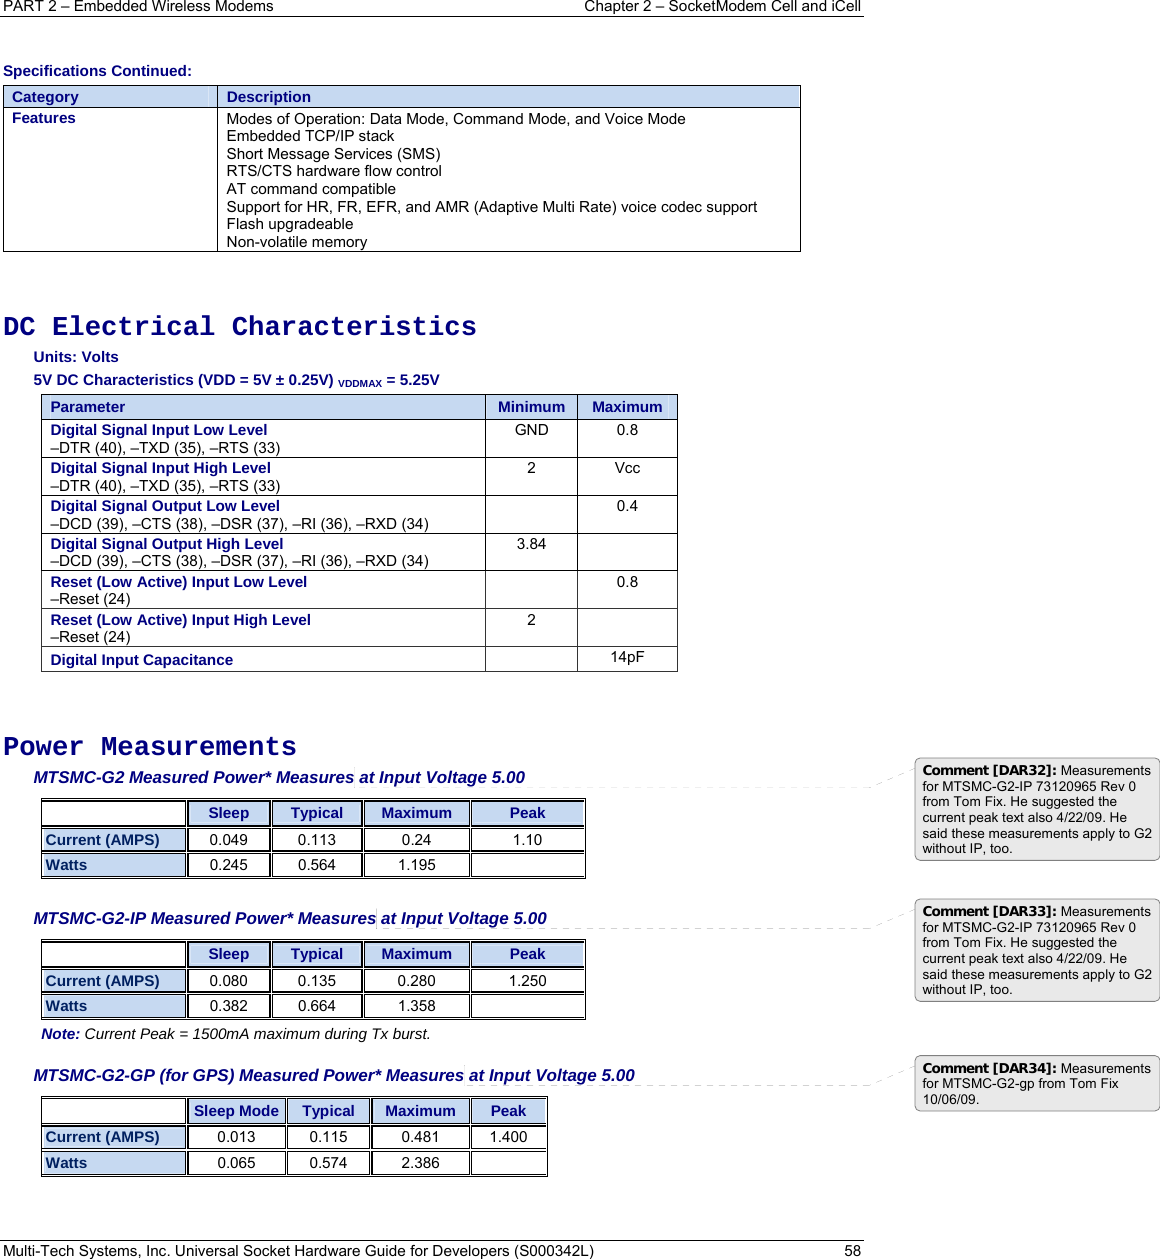 PART 2 – Embedded Wireless Modems   Chapter 2 – SocketModem Cell and iCell Multi-Tech Systems, Inc. Universal Socket Hardware Guide for Developers (S000342L)  58   Specifications Continued:  Category  Description Features  Modes of Operation: Data Mode, Command Mode, and Voice Mode Embedded TCP/IP stack Short Message Services (SMS)  RTS/CTS hardware flow control AT command compatible Support for HR, FR, EFR, and AMR (Adaptive Multi Rate) voice codec support Flash upgradeable Non-volatile memory   DC Electrical Characteristics Units: Volts 5V DC Characteristics (VDD = 5V ± 0.25V) VDDMAX = 5.25V Parameter Minimum Maximum Digital Signal Input Low Level –DTR (40), –TXD (35), –RTS (33) GND 0.8 Digital Signal Input High Level –DTR (40), –TXD (35), –RTS (33) 2 Vcc Digital Signal Output Low Level –DCD (39), –CTS (38), –DSR (37), –RI (36), –RXD (34)  0.4 Digital Signal Output High Level –DCD (39), –CTS (38), –DSR (37), –RI (36), –RXD (34) 3.84  Reset (Low Active) Input Low Level –Reset (24)  0.8 Reset (Low Active) Input High Level –Reset (24) 2  Digital Input Capacitance   14pF   Power Measurements MTSMC-G2 Measured Power* Measures at Input Voltage 5.00   Sleep  Typical  Maximum  Peak Current (AMPS) 0.049 0.113 0.24 1.10 Watts 0.245 0.564 1.195    MTSMC-G2-IP Measured Power* Measures at Input Voltage 5.00   Sleep  Typical  Maximum  Peak Current (AMPS) 0.080 0.135 0.280 1.250 Watts 0.382 0.664 1.358   Note: Current Peak = 1500mA maximum during Tx burst.  MTSMC-G2-GP (for GPS) Measured Power* Measures at Input Voltage 5.00   Sleep Mode  Typical  Maximum  Peak Current (AMPS) 0.013 0.115 0.481 1.400 Watts 0.065 0.574 2.386    Comment [DAR32]: Measurements for MTSMC-G2-IP 73120965 Rev 0 from Tom Fix. He suggested the current peak text also 4/22/09. He said these measurements apply to G2 without IP, too. Comment [DAR33]: Measurements for MTSMC-G2-IP 73120965 Rev 0 from Tom Fix. He suggested the current peak text also 4/22/09. He said these measurements apply to G2 without IP, too. Comment [DAR34]: Measurements for MTSMC-G2-gp from Tom Fix 10/06/09. 